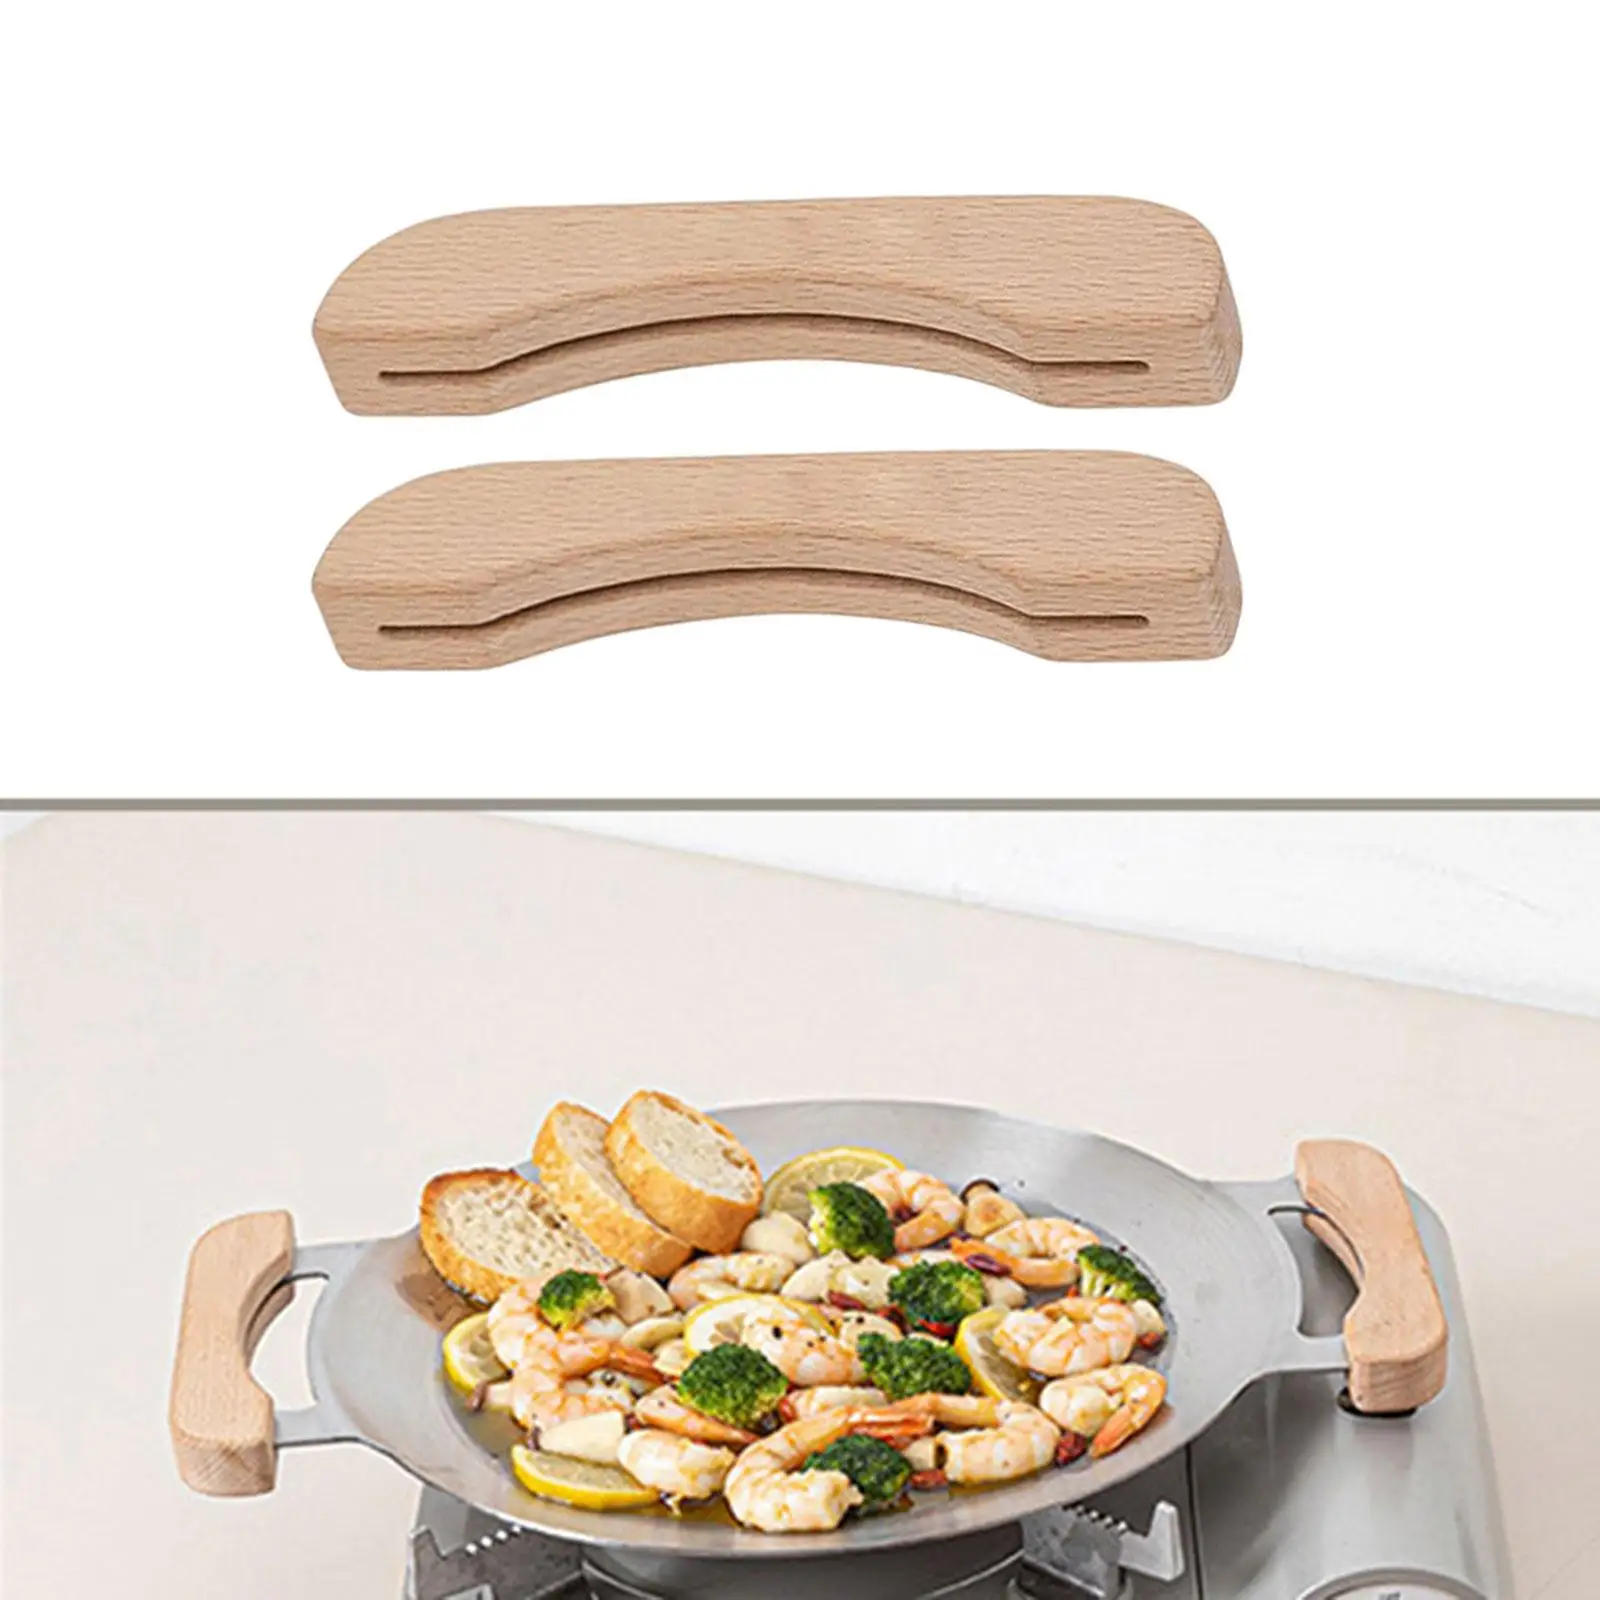 BBQ Barbecue Pan Handle Scald Proof Heat Resistant for Grill Pan Camping